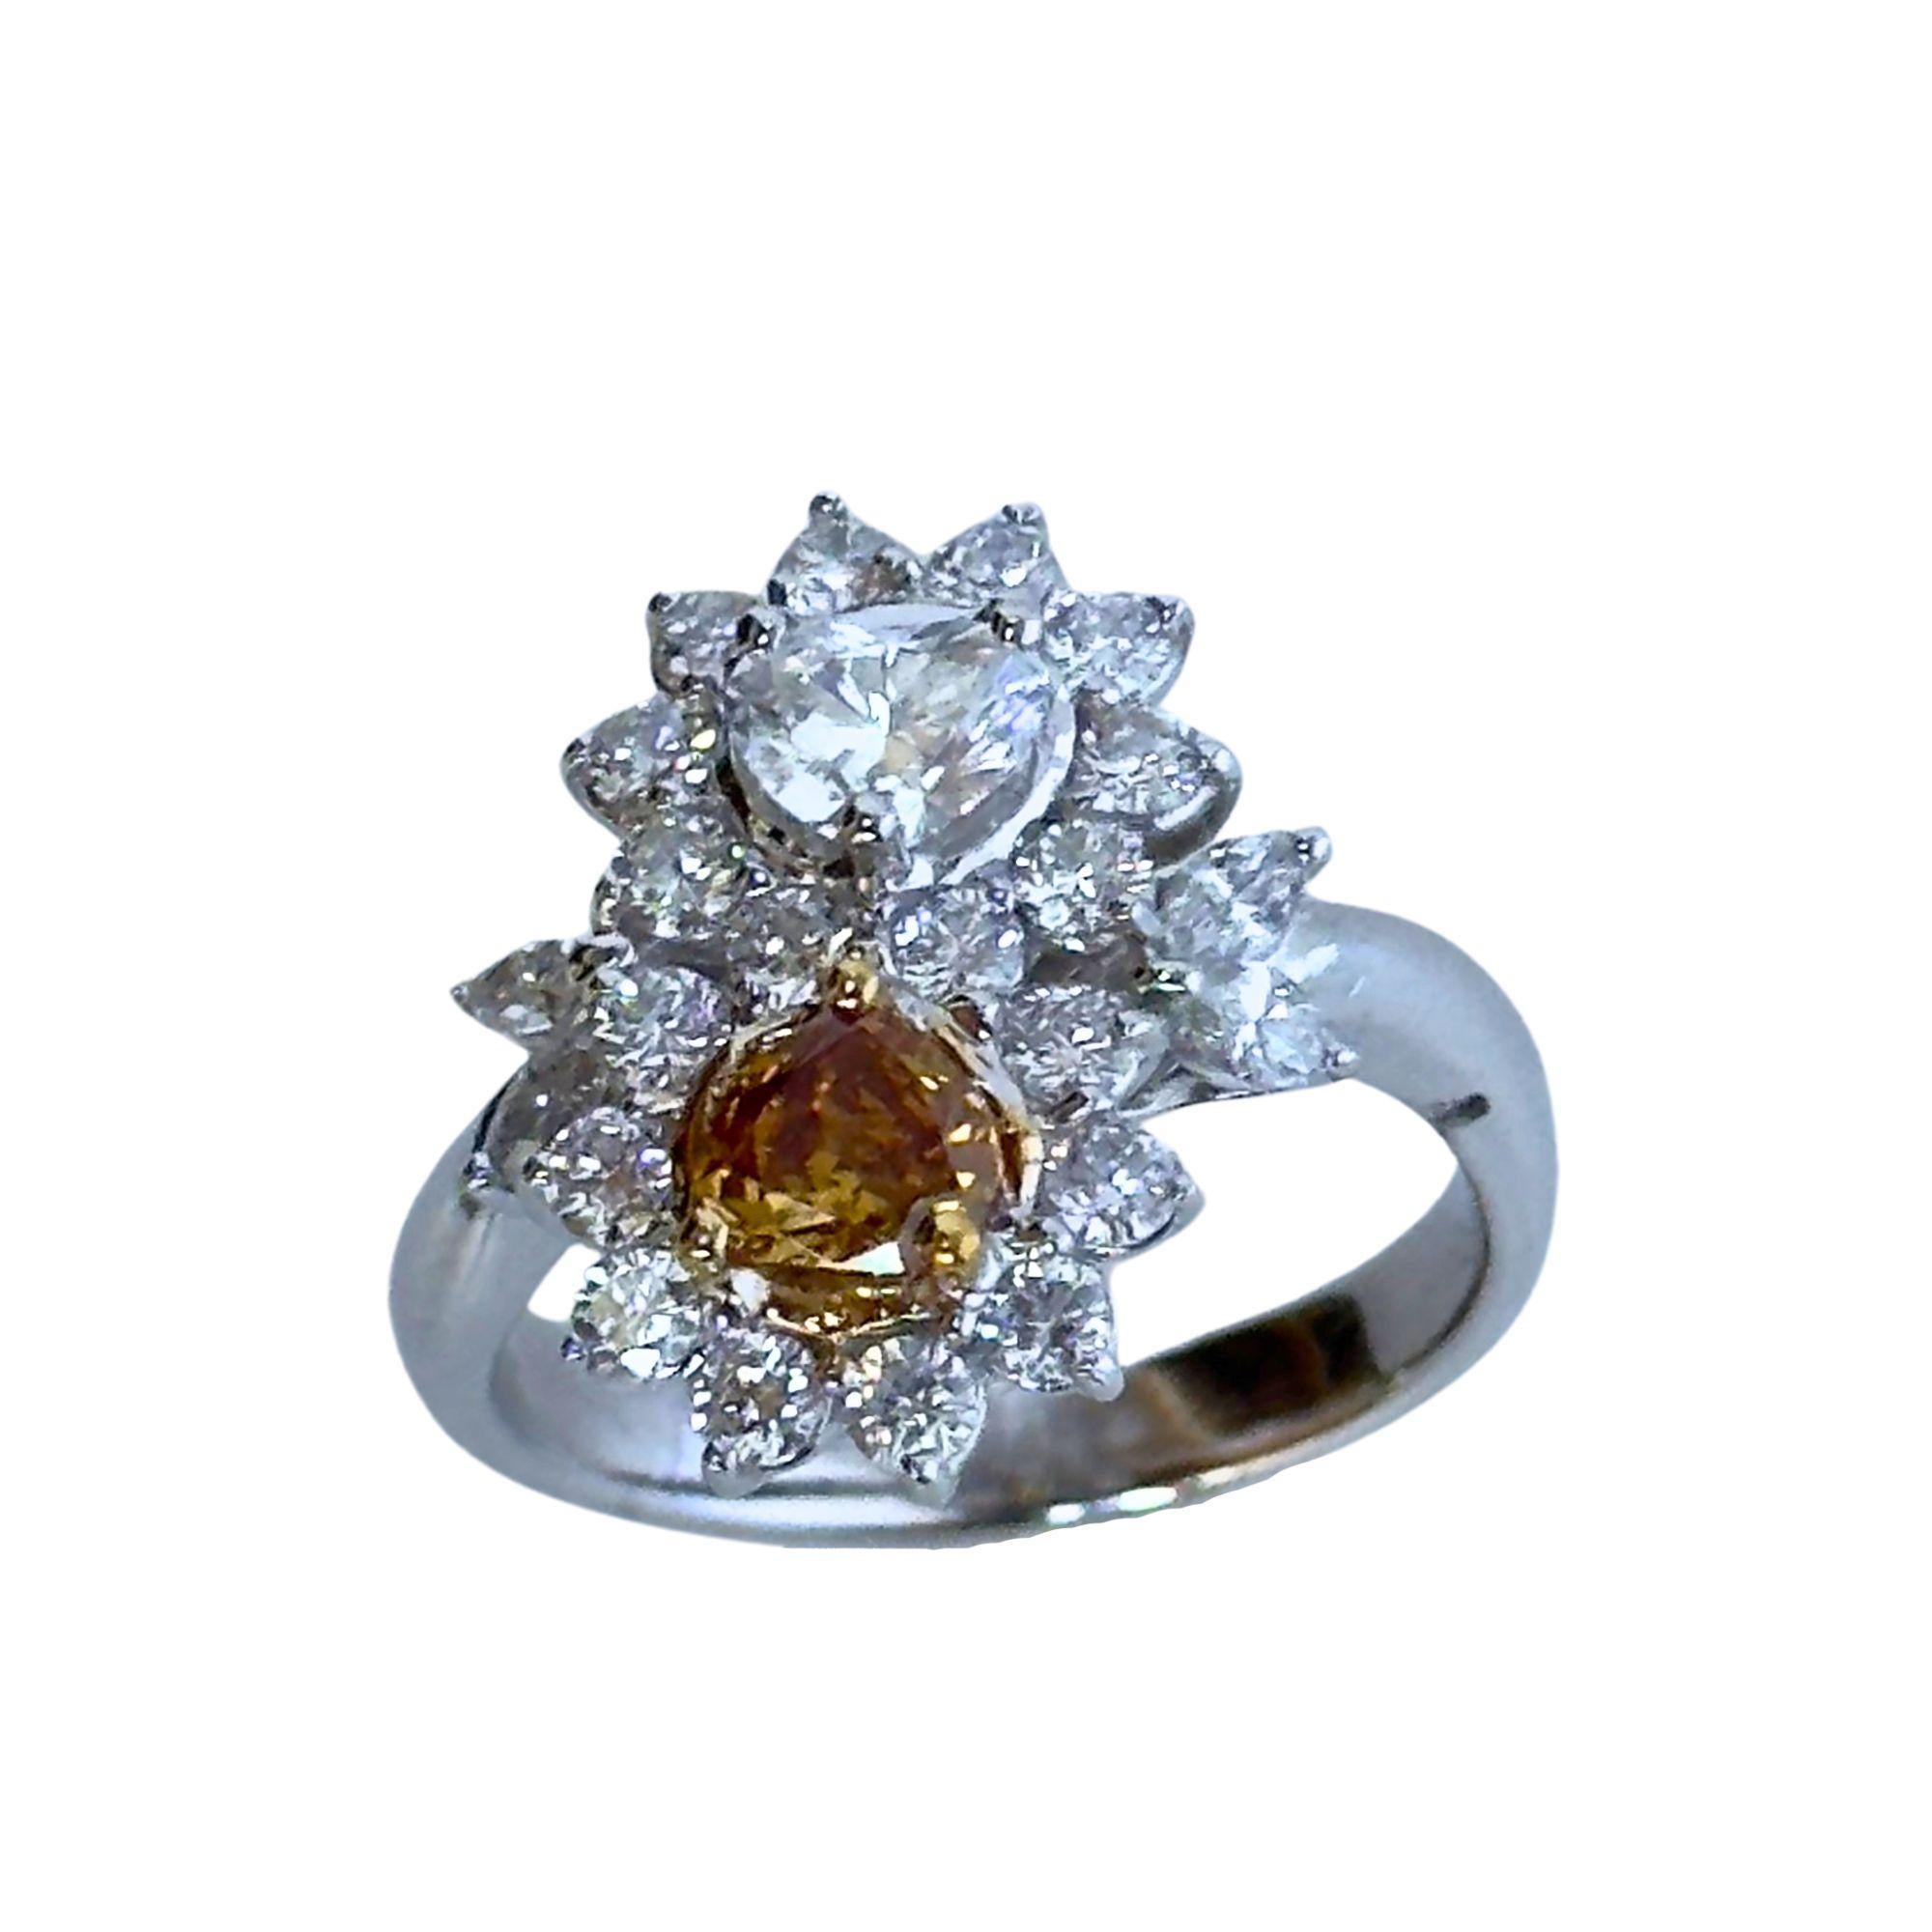 Look at this beautiful 18k White and Yellow Diamond Ring. This ring weighs a delightful 5.84 grams and a size 6.25 ring. The white diamonds weigh 1.30 carats while the yellow diamond weighs 0.38 carats, creating a delightful contrast and adding a